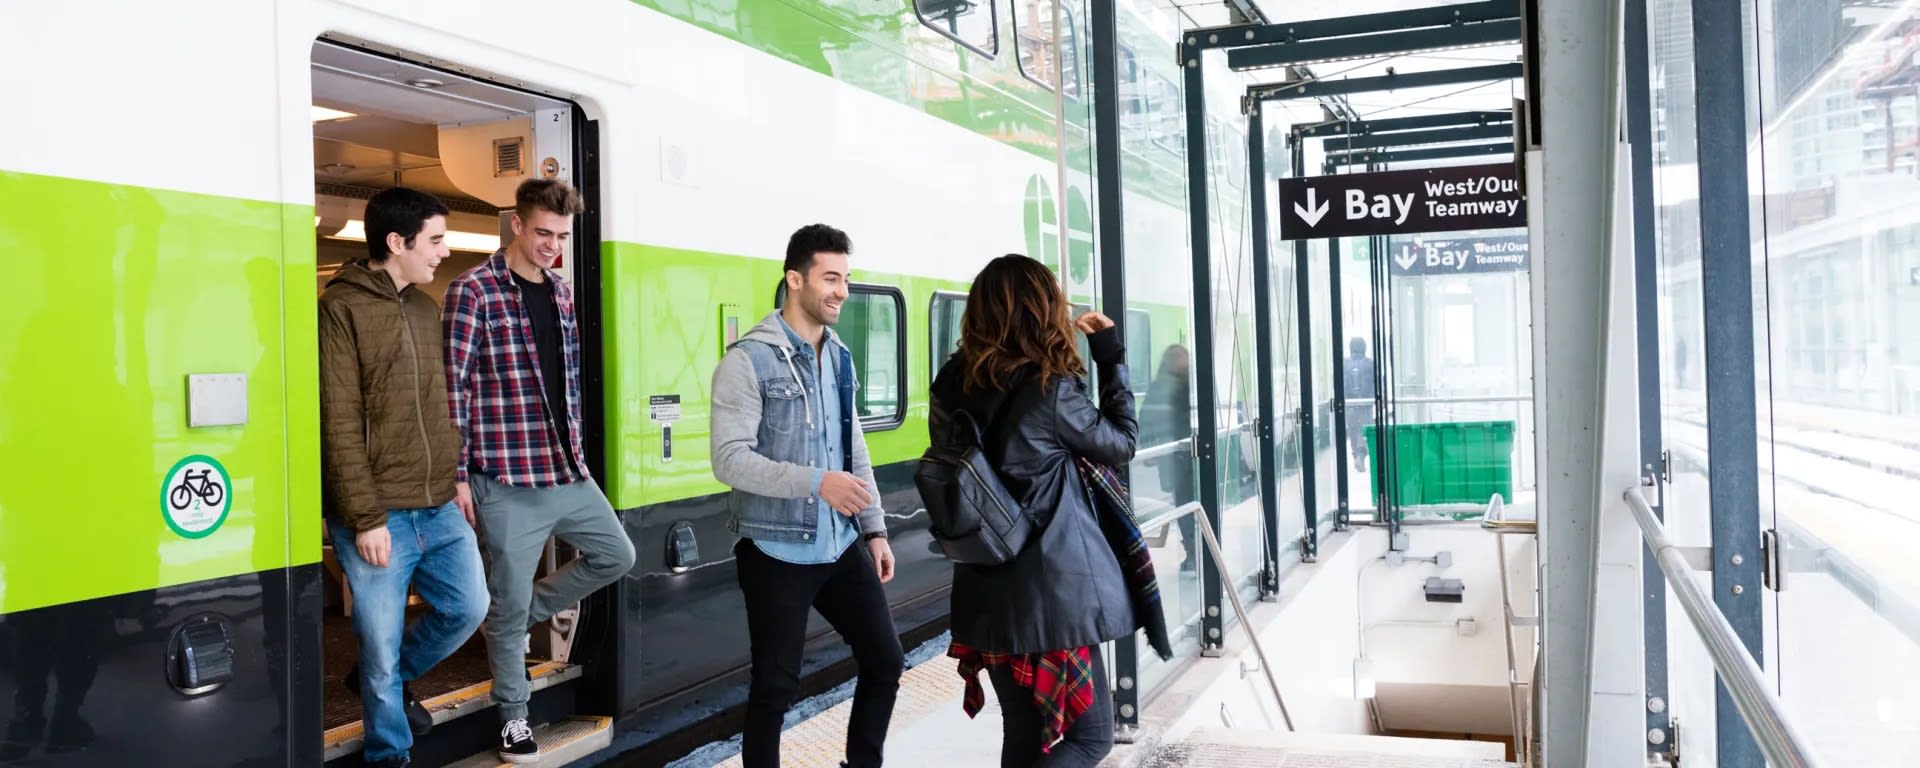 Metrolinx CEO announces popular travel program will extend into the spring, starting March 1, 2020